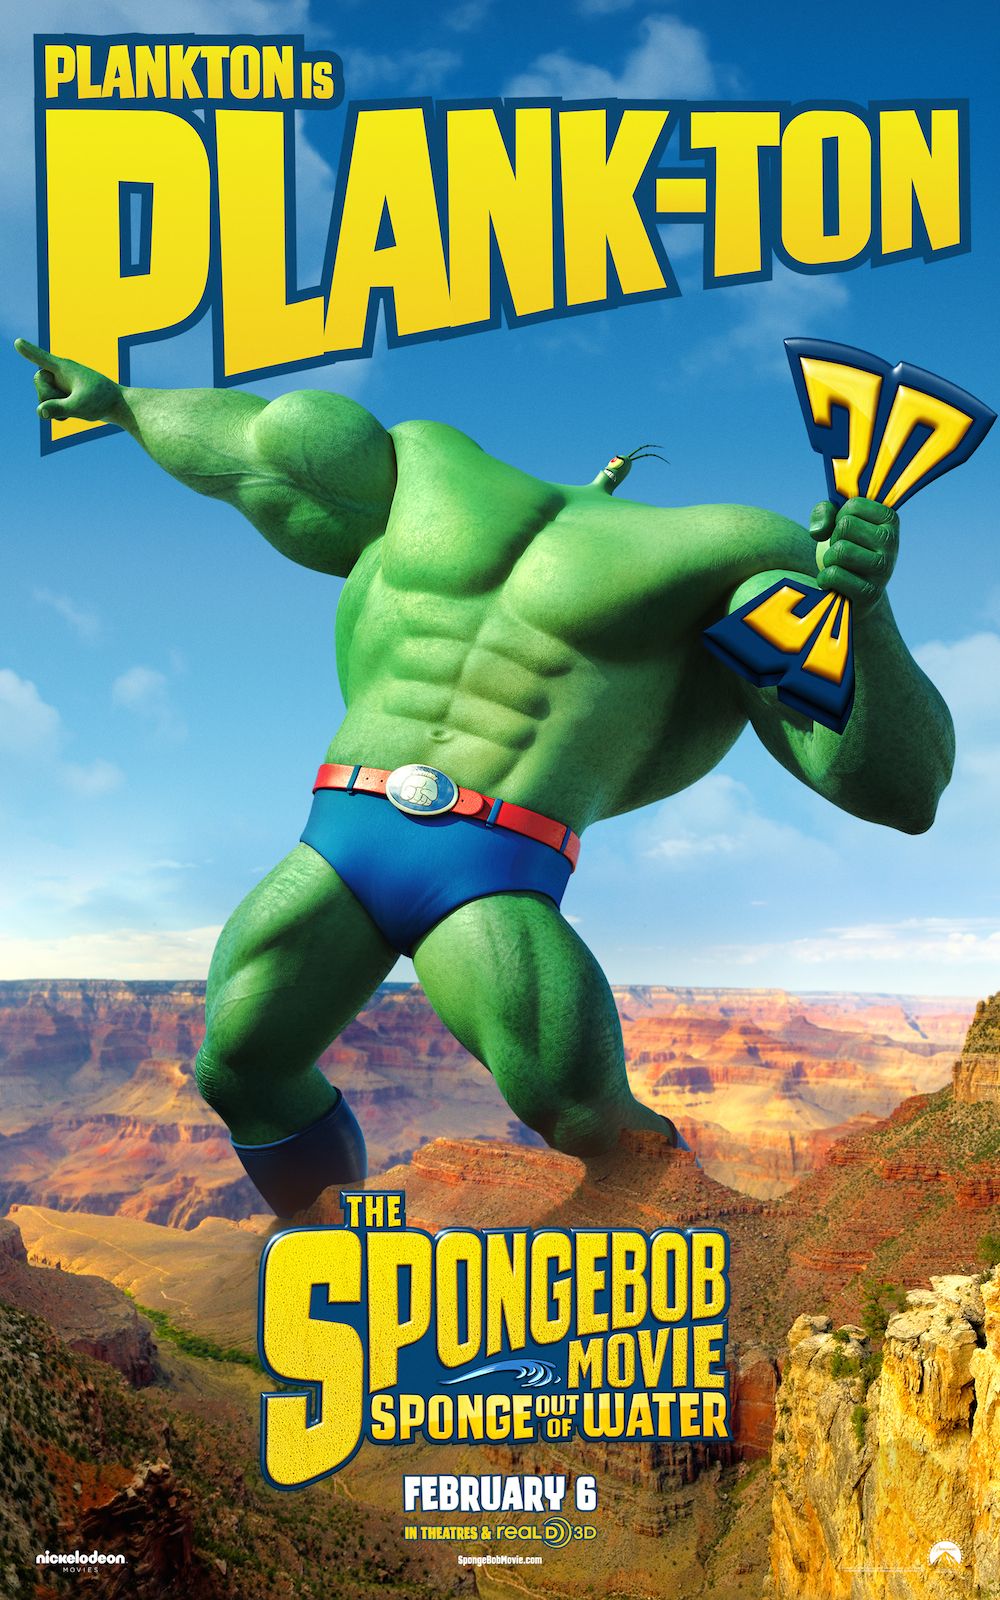 The Spongebob Movie: Sponge Out of Water Plankton Character Poster